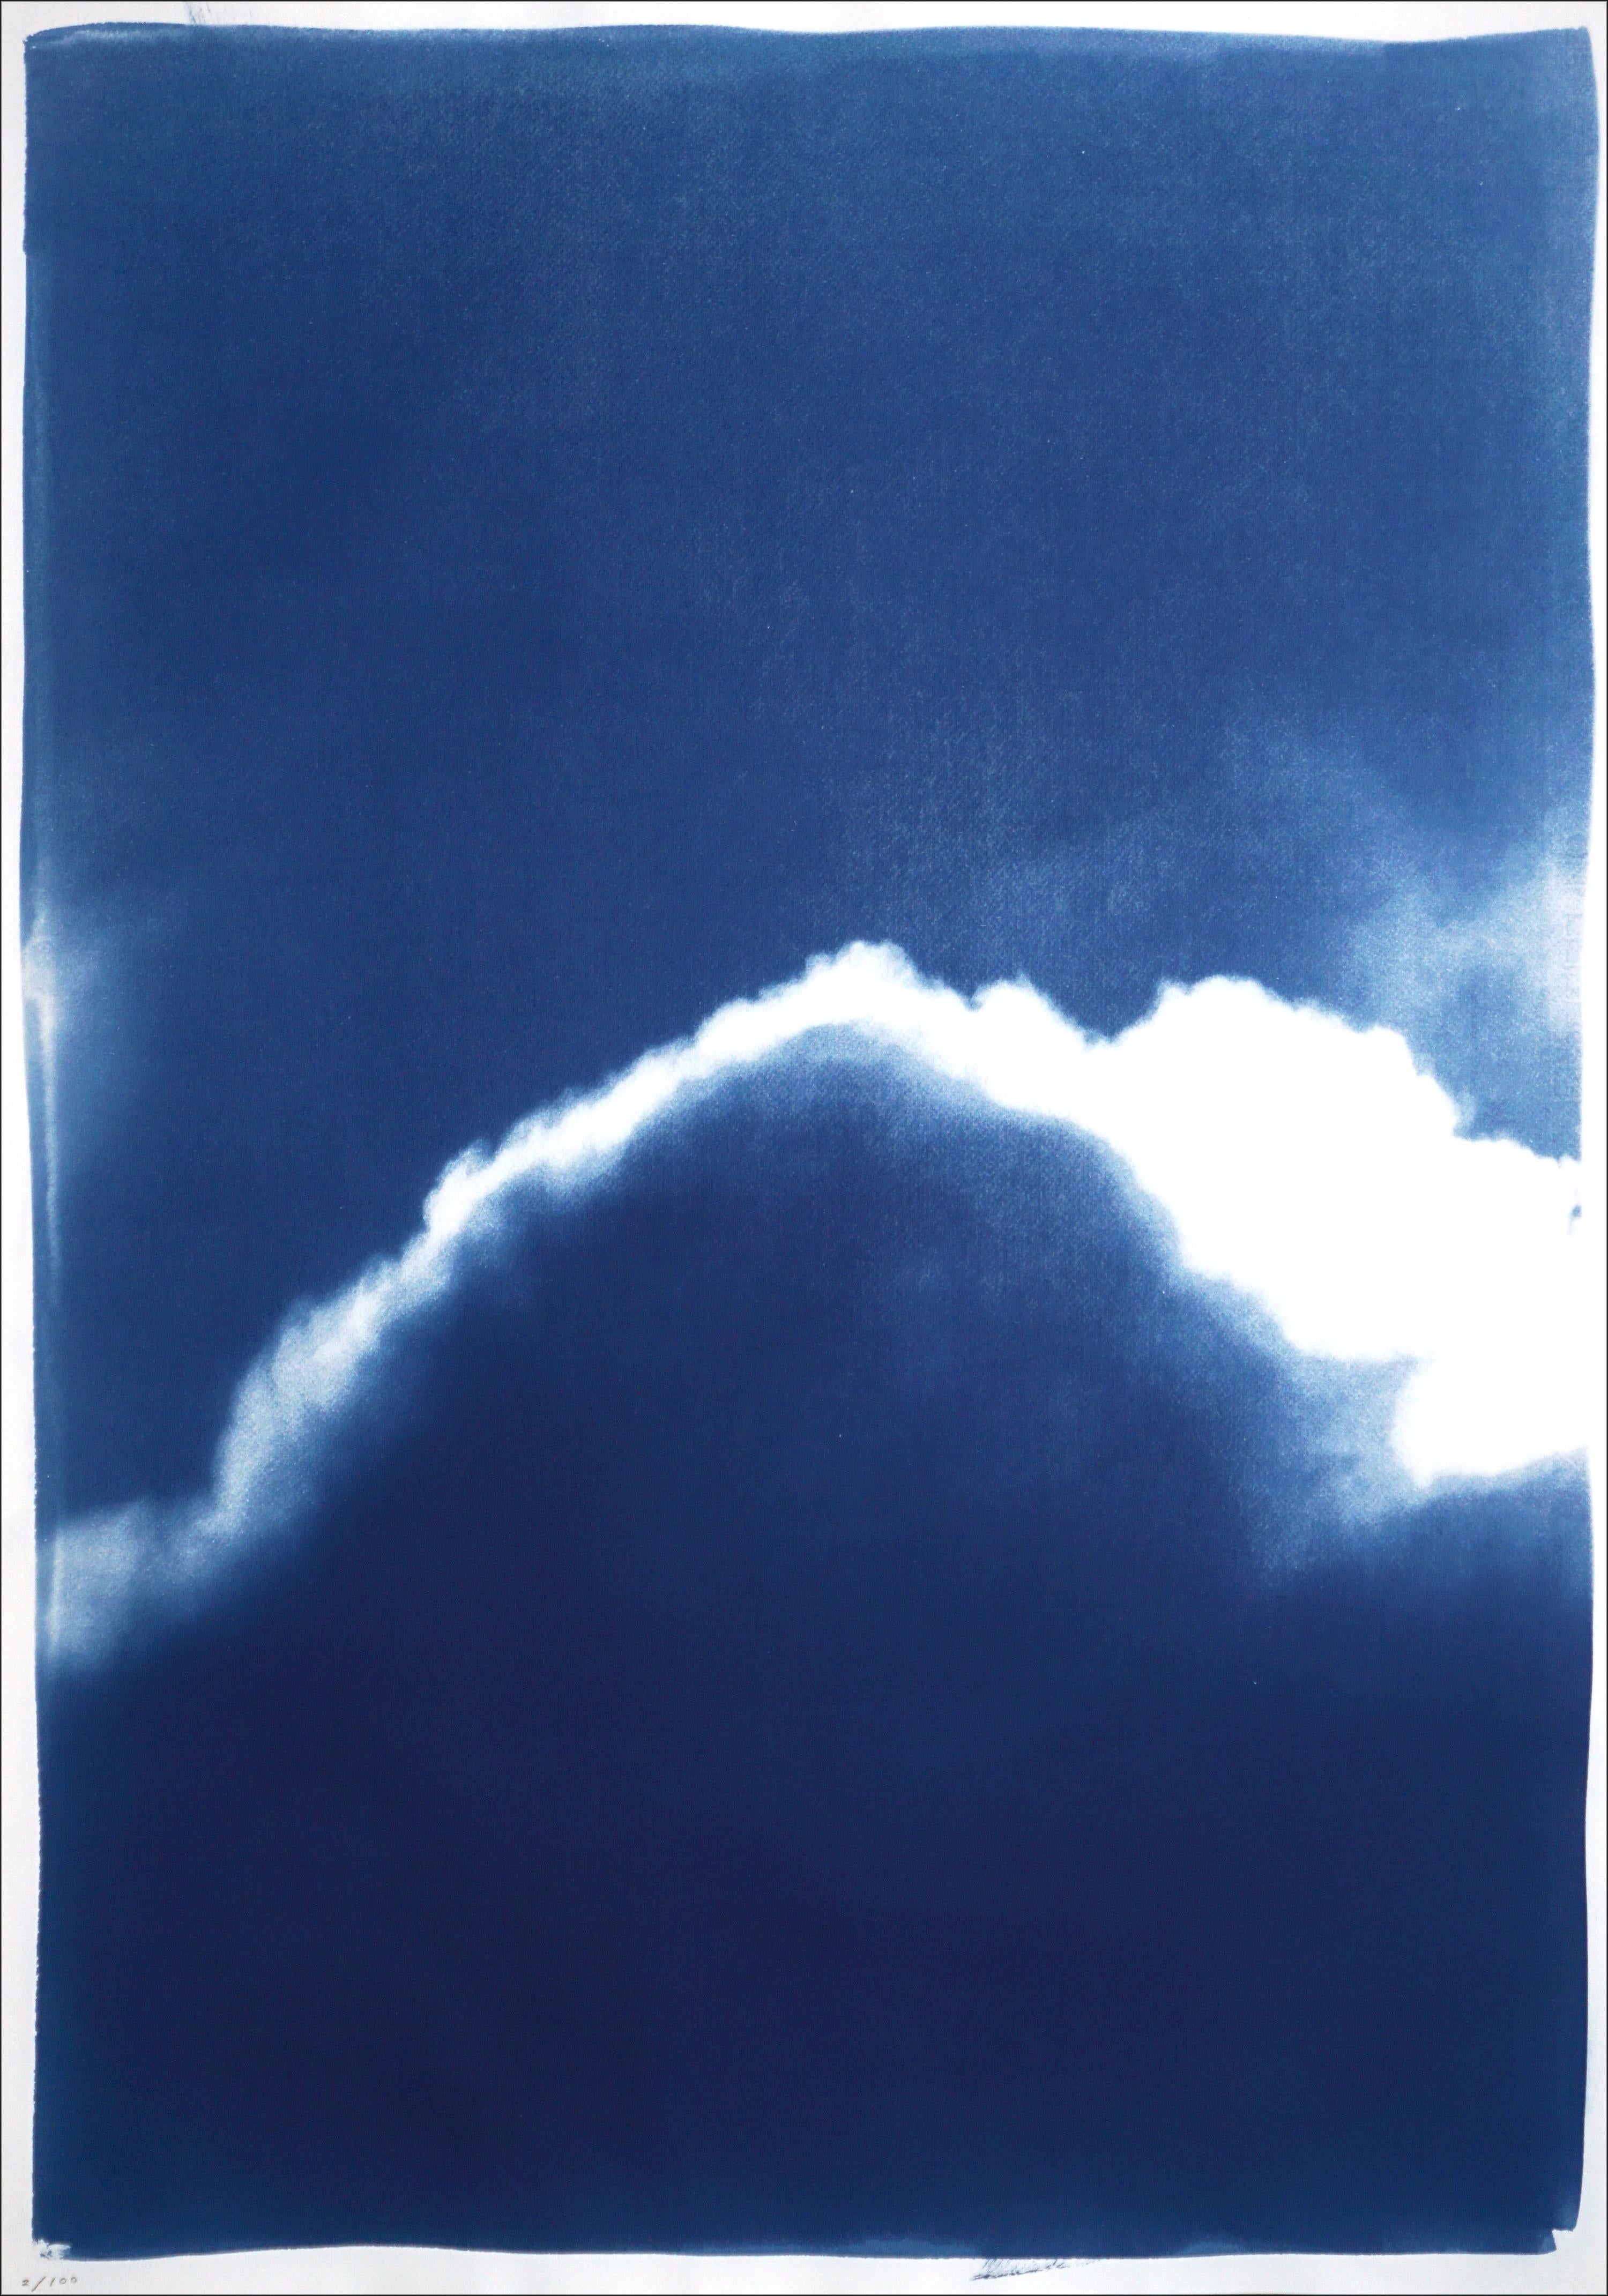 Extra Large Triptych of Waves of Clouds, Blue Tones Cyanotype Print, Cloudy Sky 1